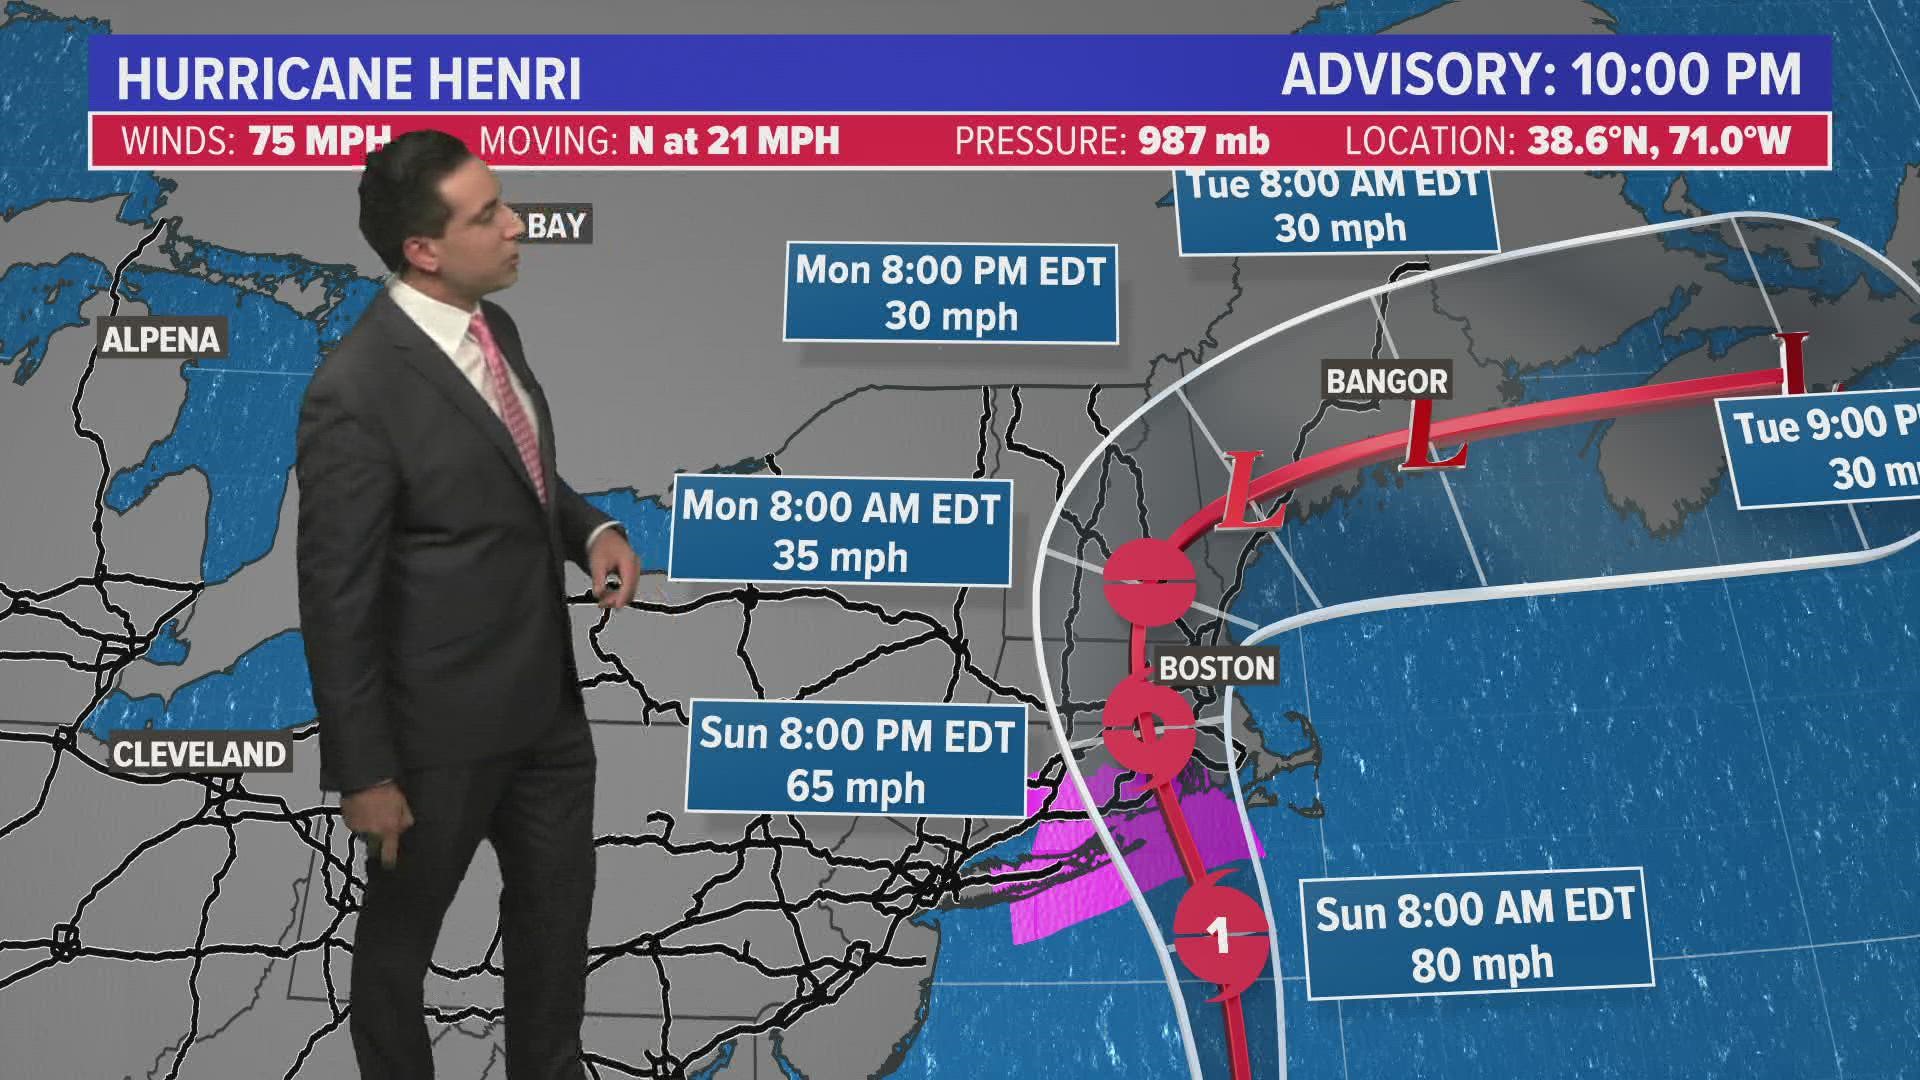 Hurricane Henri's track has shifted a little east and is expected to make landfall Sunday as a Cateogry 1 storm, according to KHOU 11 Meteorologist Tim Pandajis.